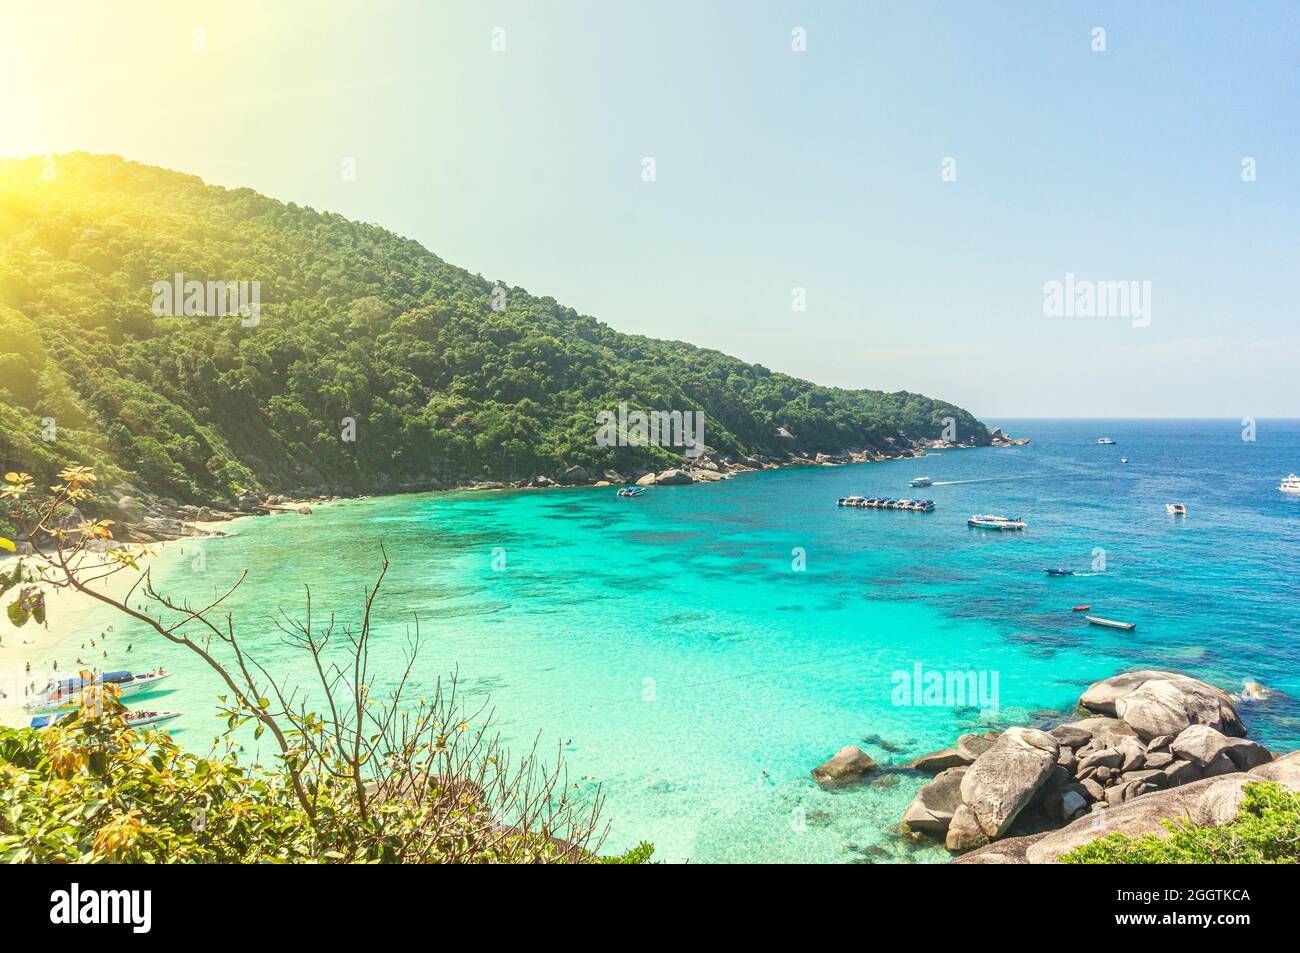 A beautiful lagoon of the blue sea near the coast with mountains. A tourist beach with white sand. Stock Photo